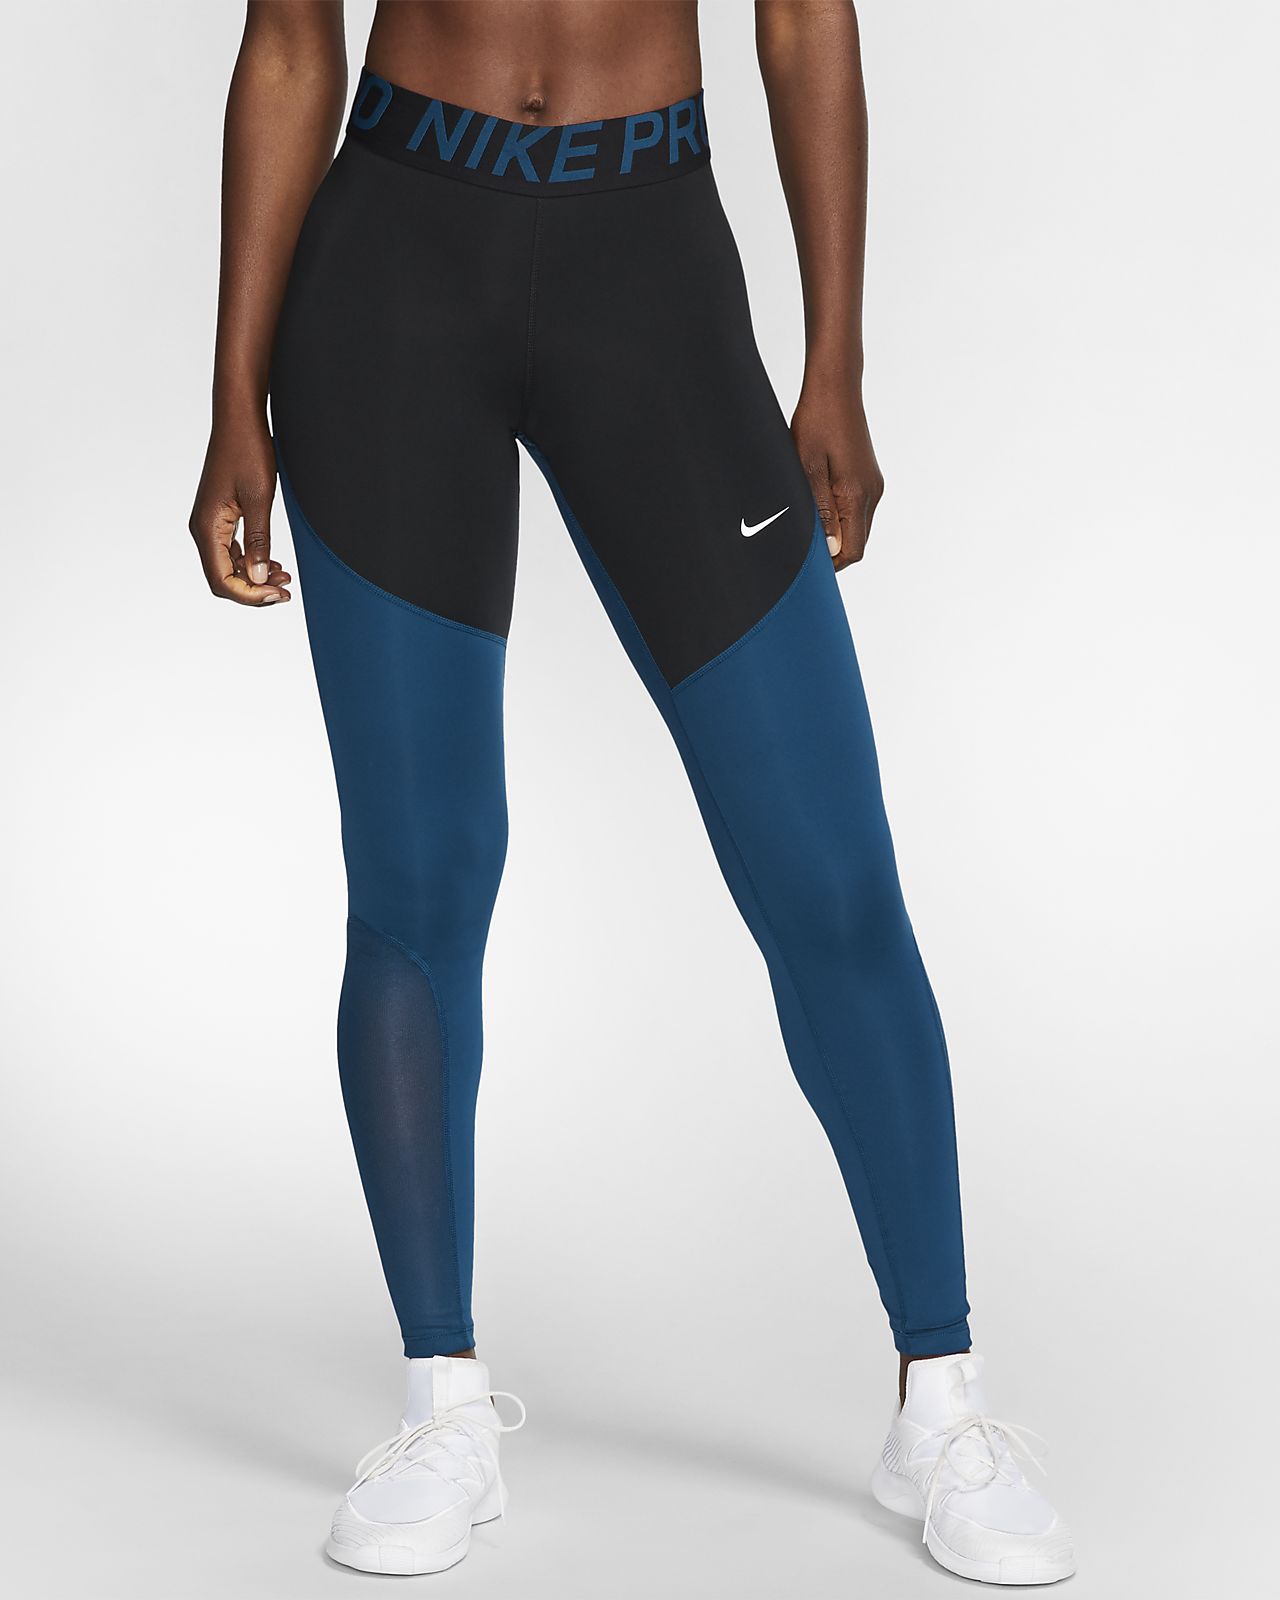 womens nike tights on sale